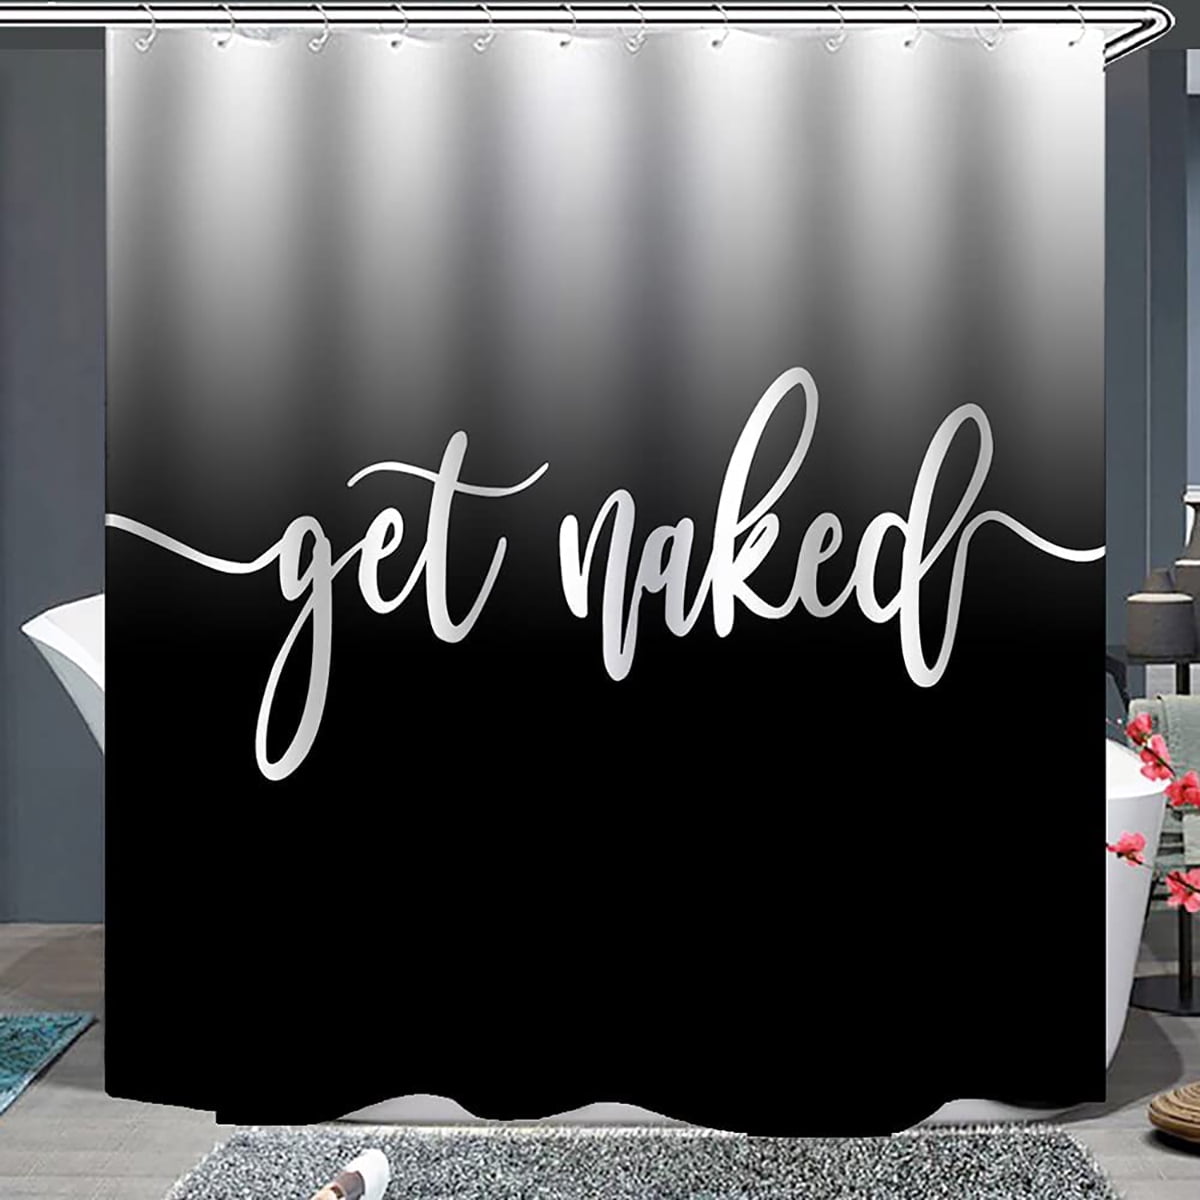 Funny Shower Curtain Cool Get Naked Fabric Bathroom Decor Set Black White 